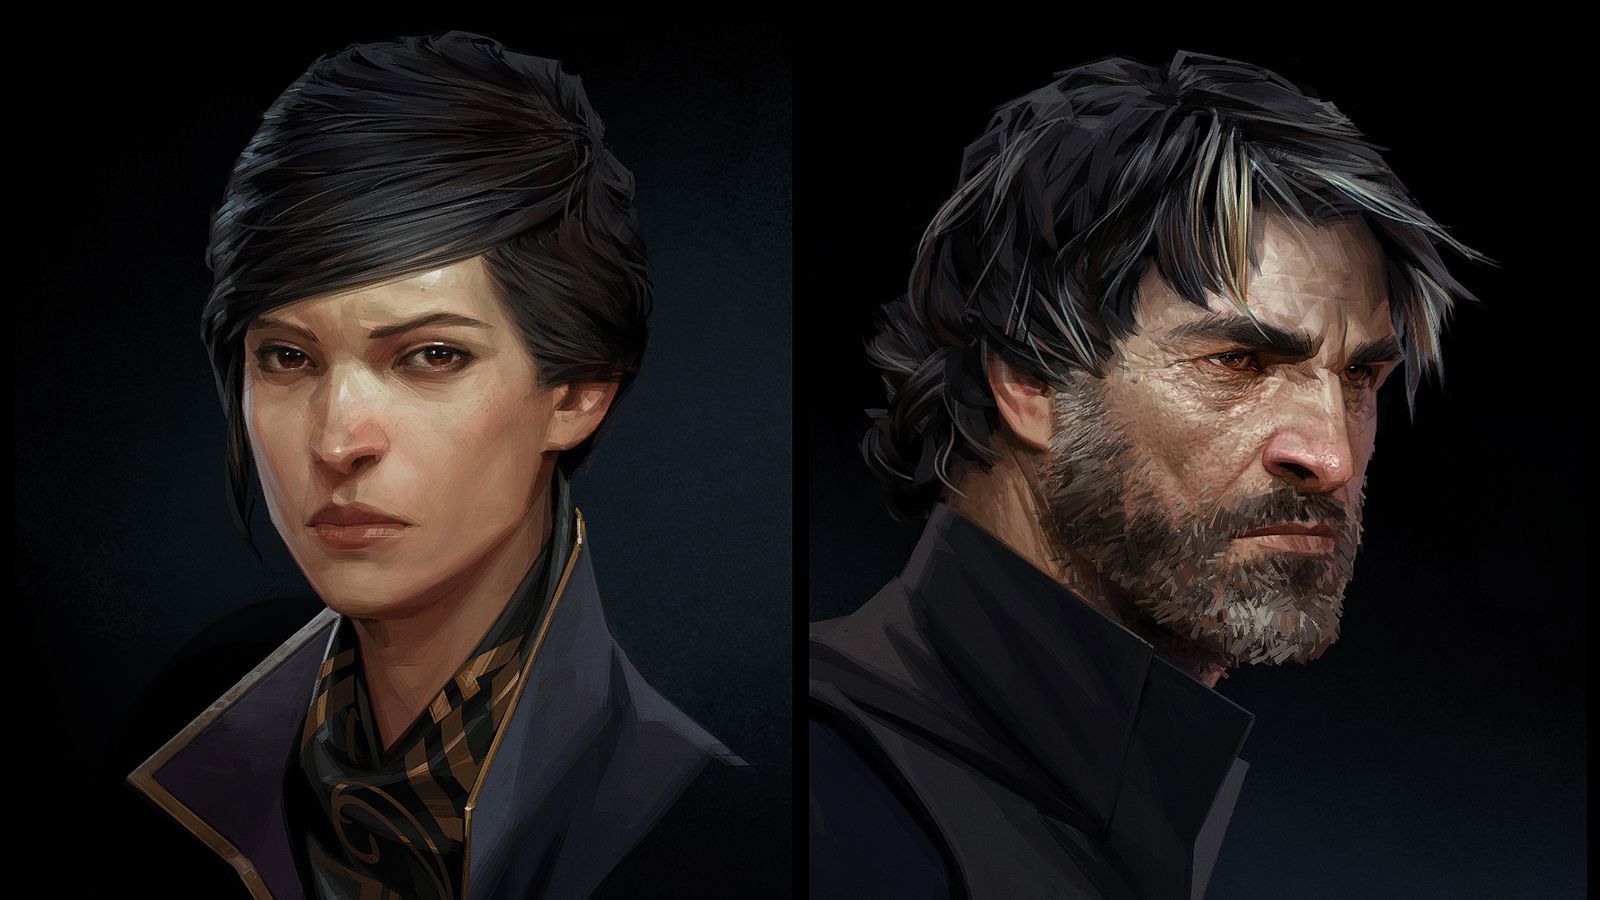 Dishonored 2's two protagonists each have their own style